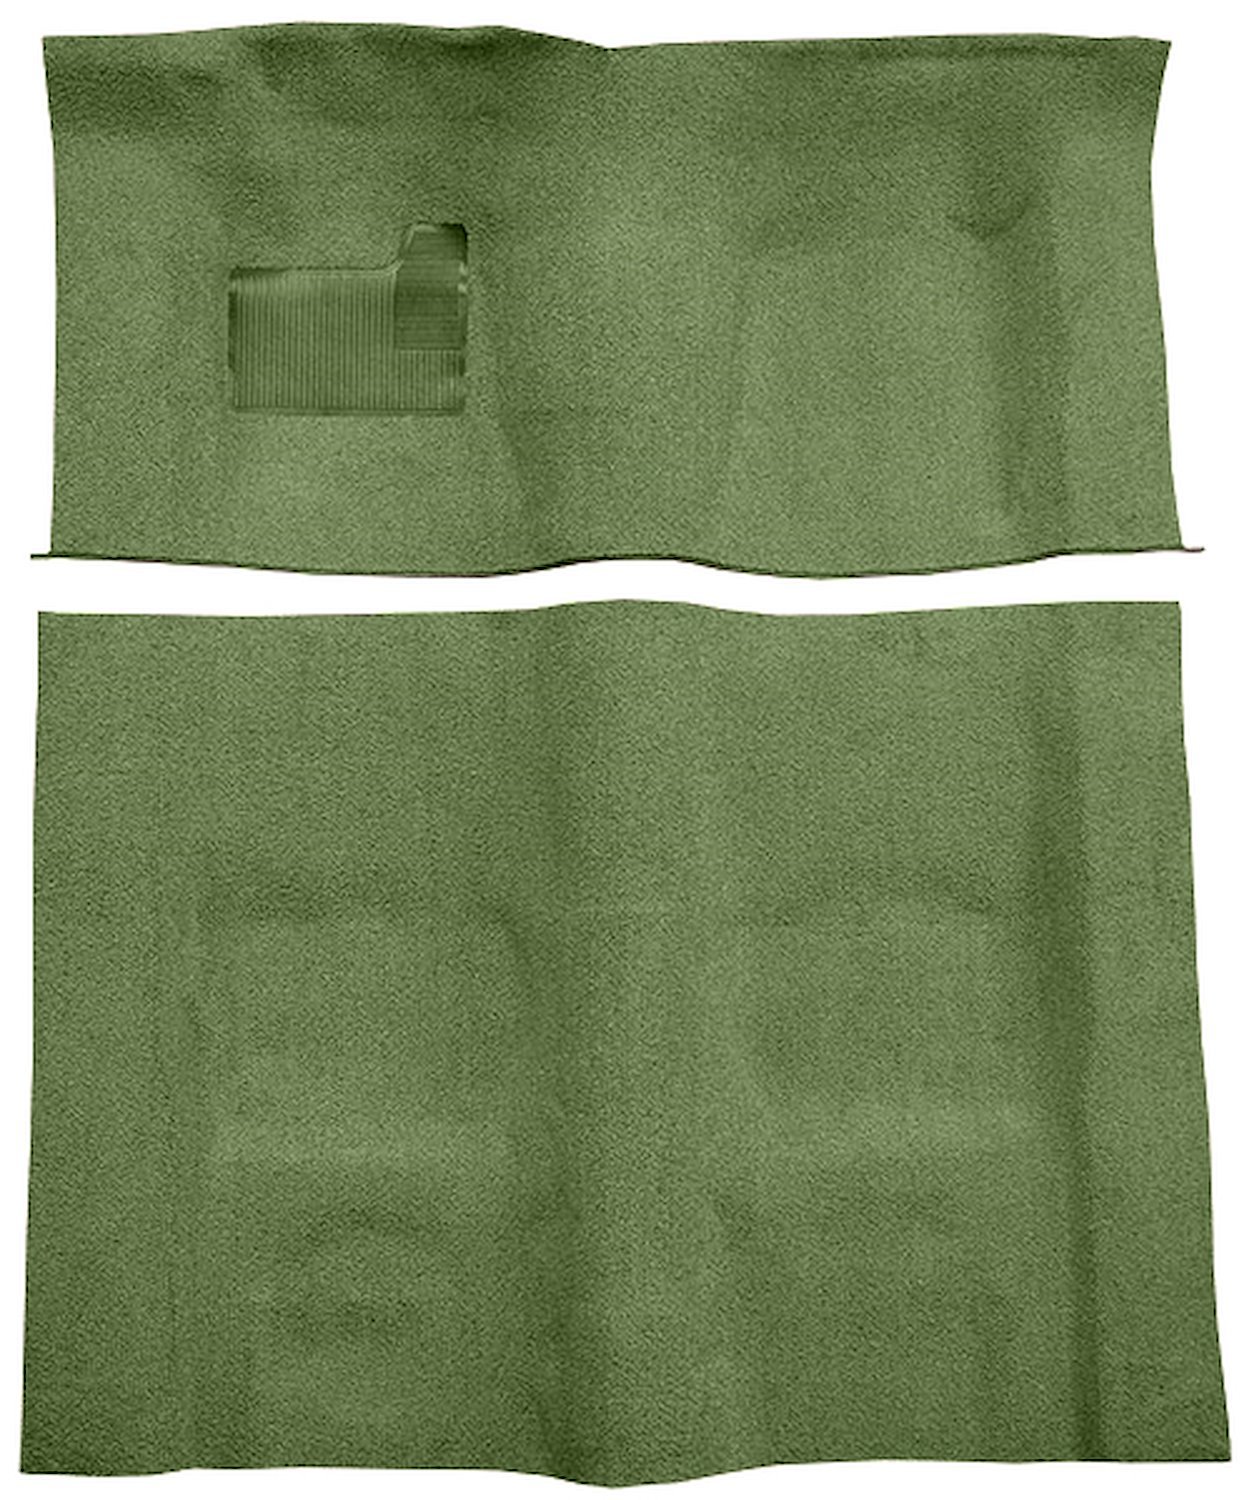 Molded Cut Pile Carpet for 1974-1975 Chevrolet Camaro, Pontiac Firebird [Mass Backing, Automatic Transmission, Willow Green]